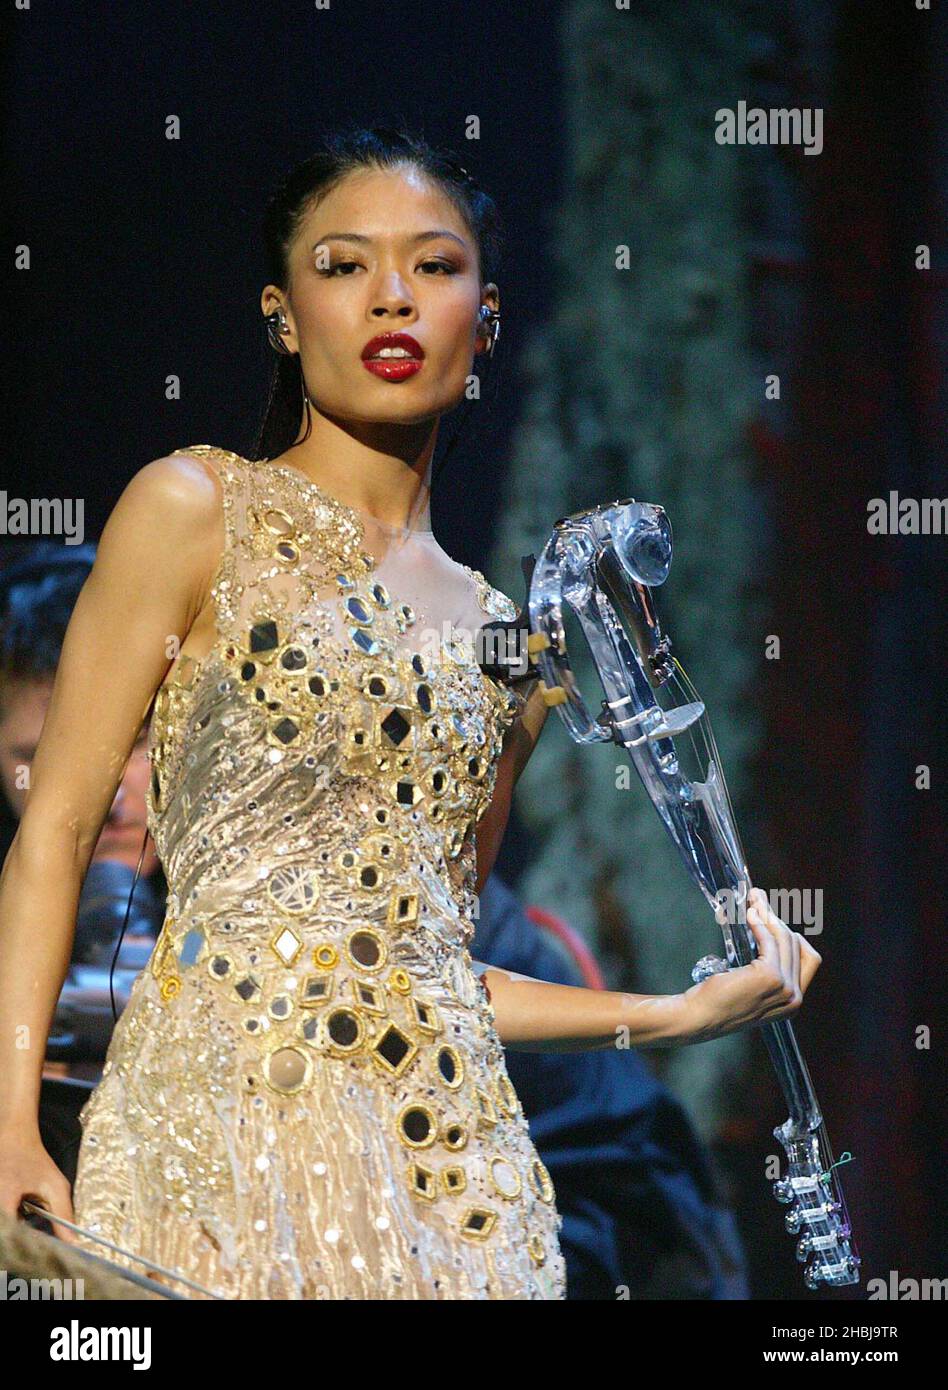 LONDON - MAY 26: Vanessa Mae at the fifth annual 'Classical Brit Awards' at the Royal Albert Hall on May 26, 2004 in London. Stock Photo